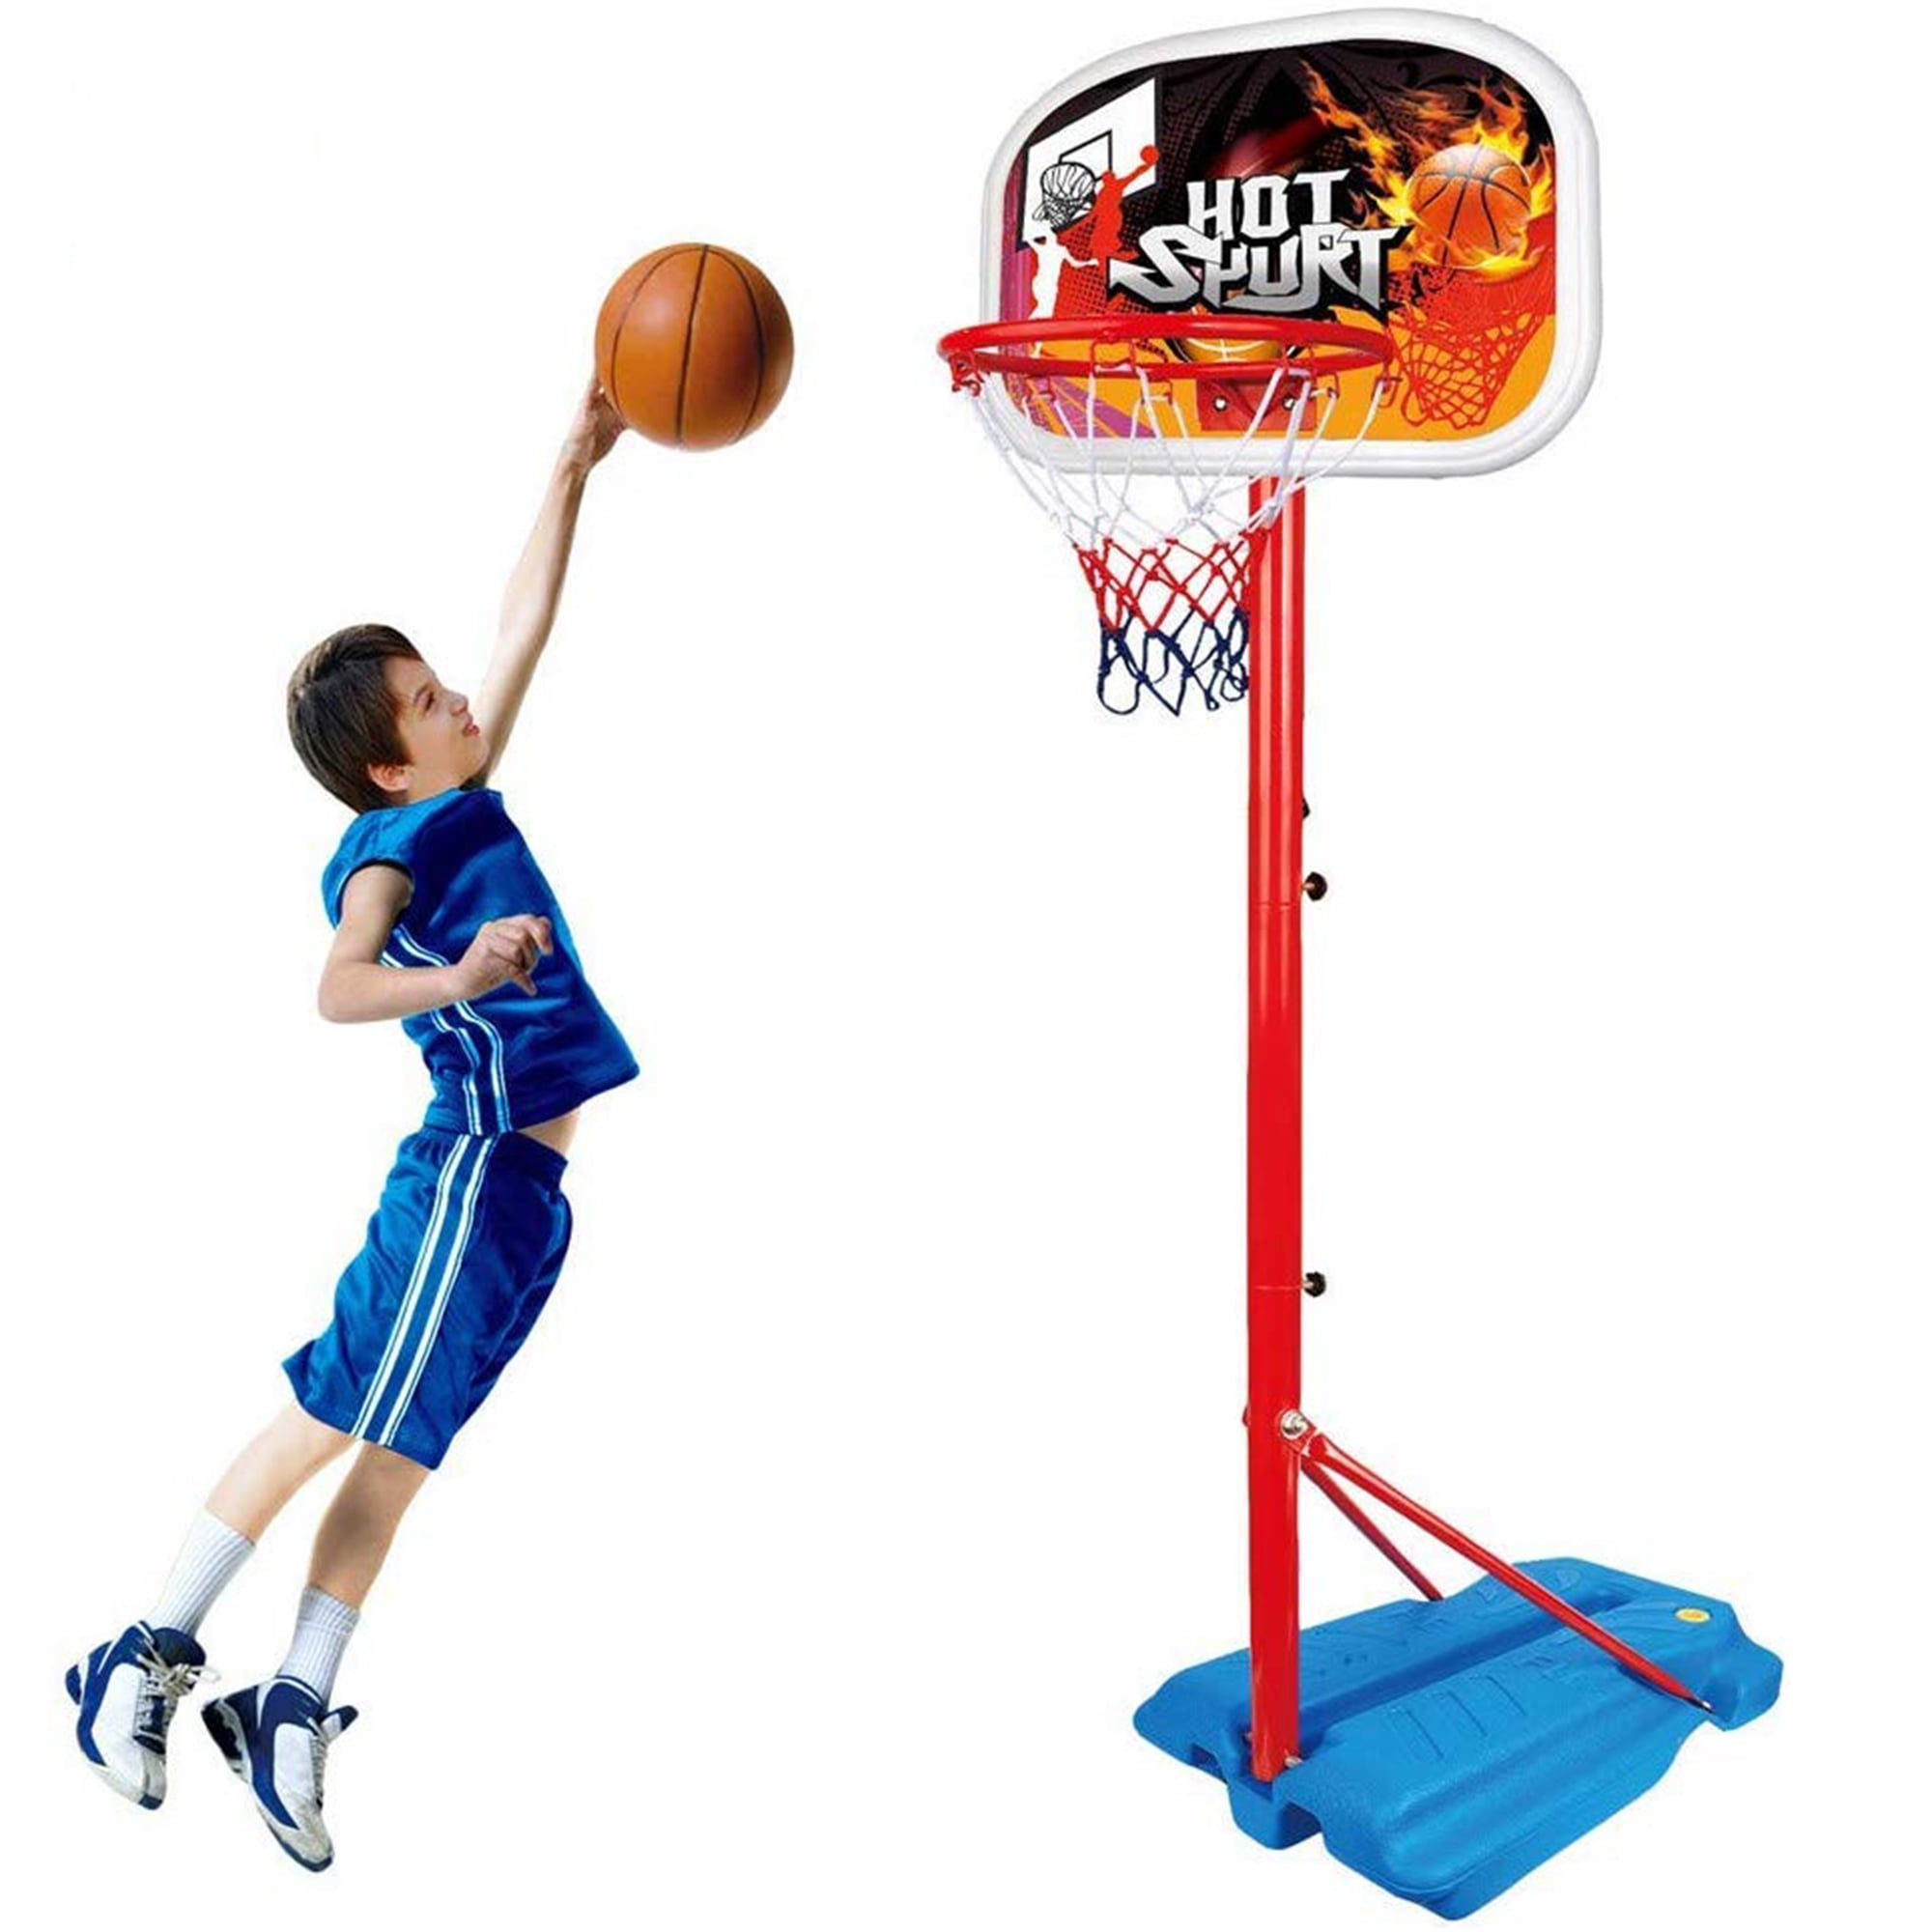 MINI BASKETBALL NET TOY HOOP RING WITH BALL CHILDREN TOY GAME BASKETBALL GIFT 